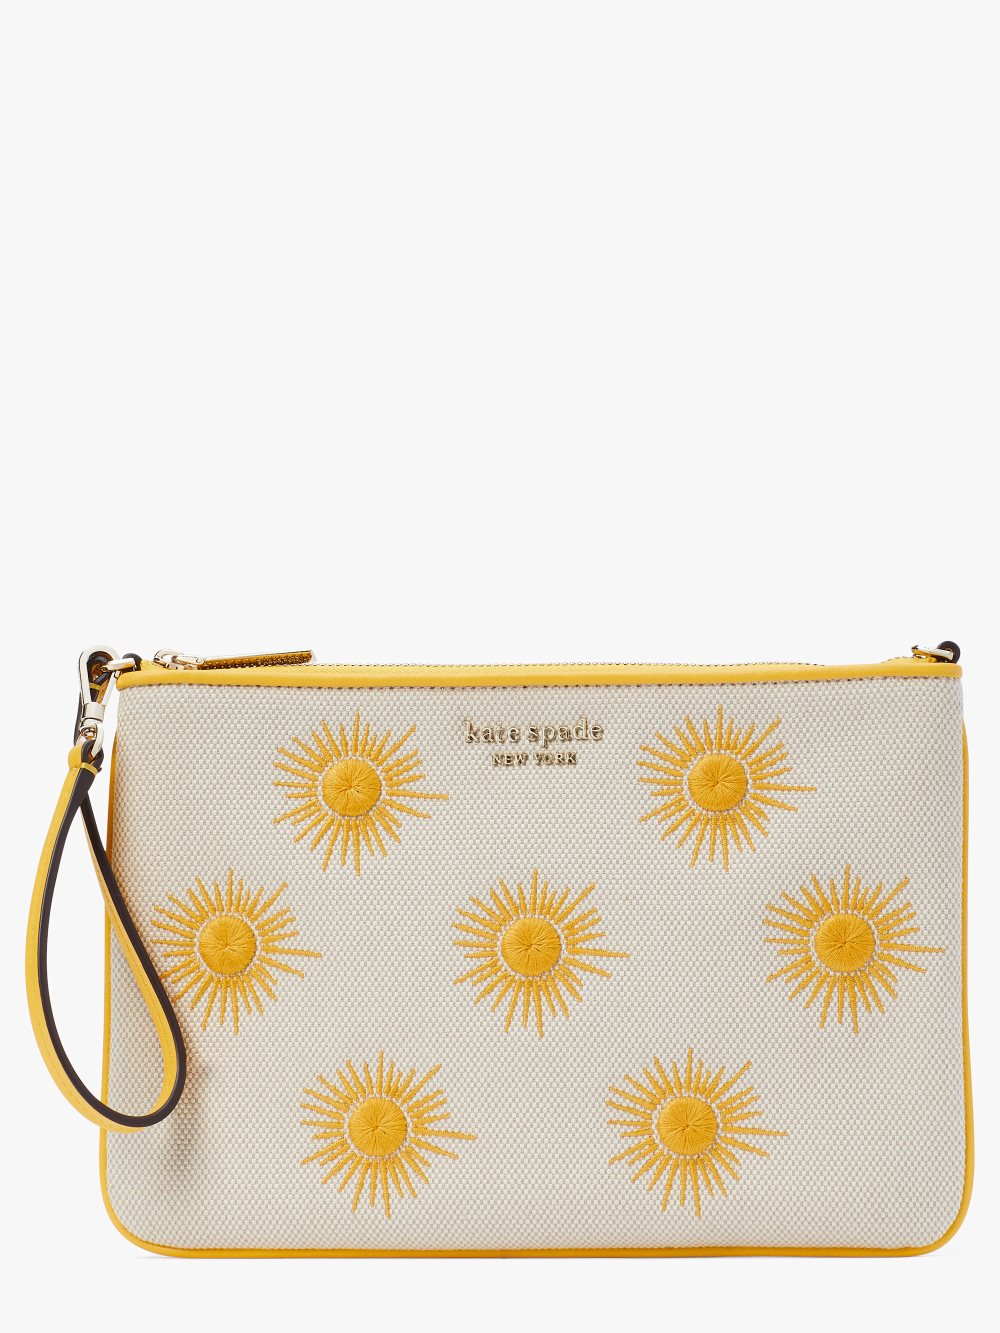 Women's morning light multi sunkiss embroidered canvas sun pouch wristlet | Kate Spade